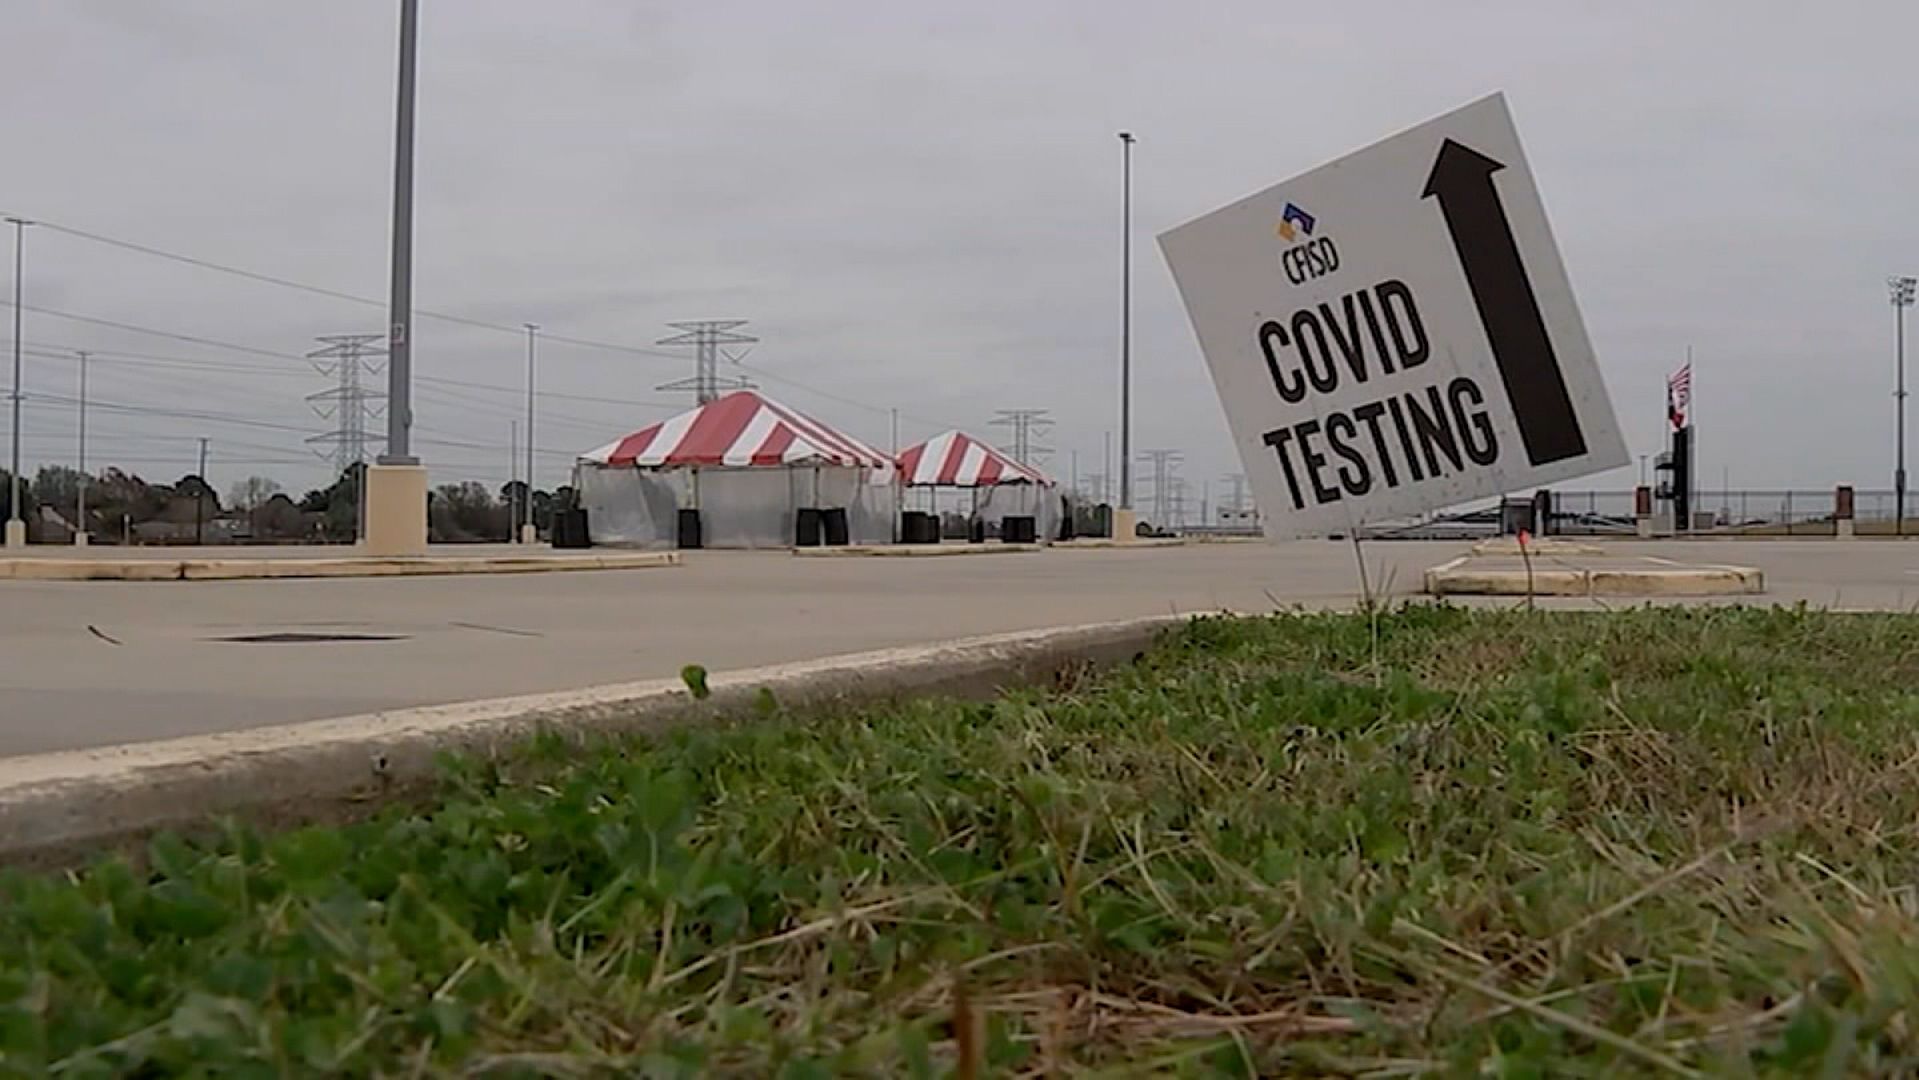 Authorities were called to the Covid-19 testing center on January 3.